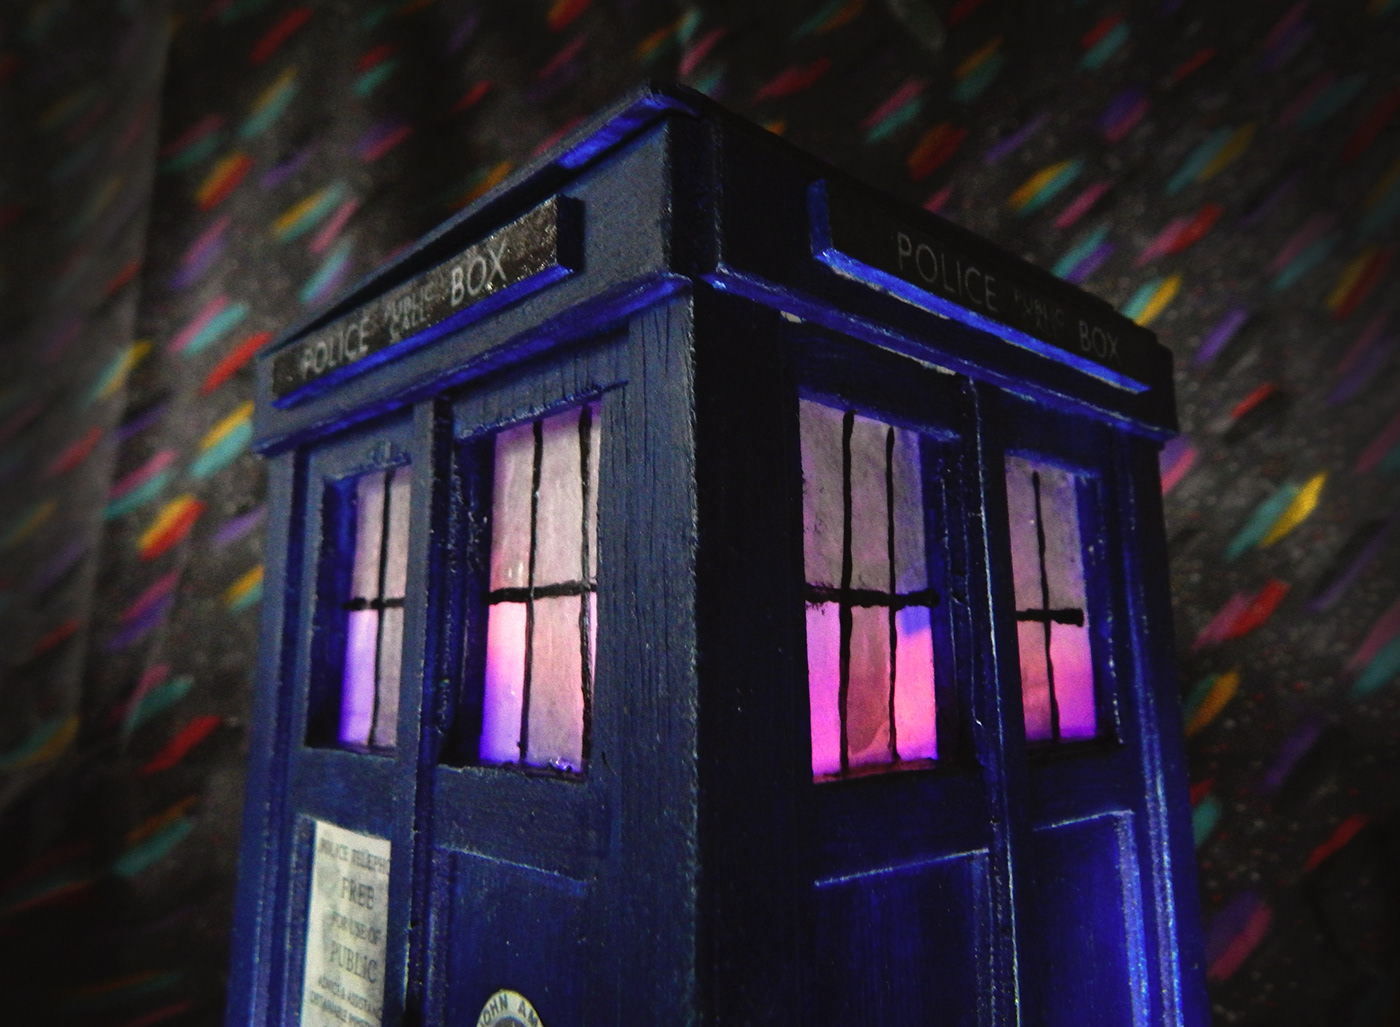 decoration Doctor Who Dr Who future Interior sci-fi science fiction tardis tea time travel